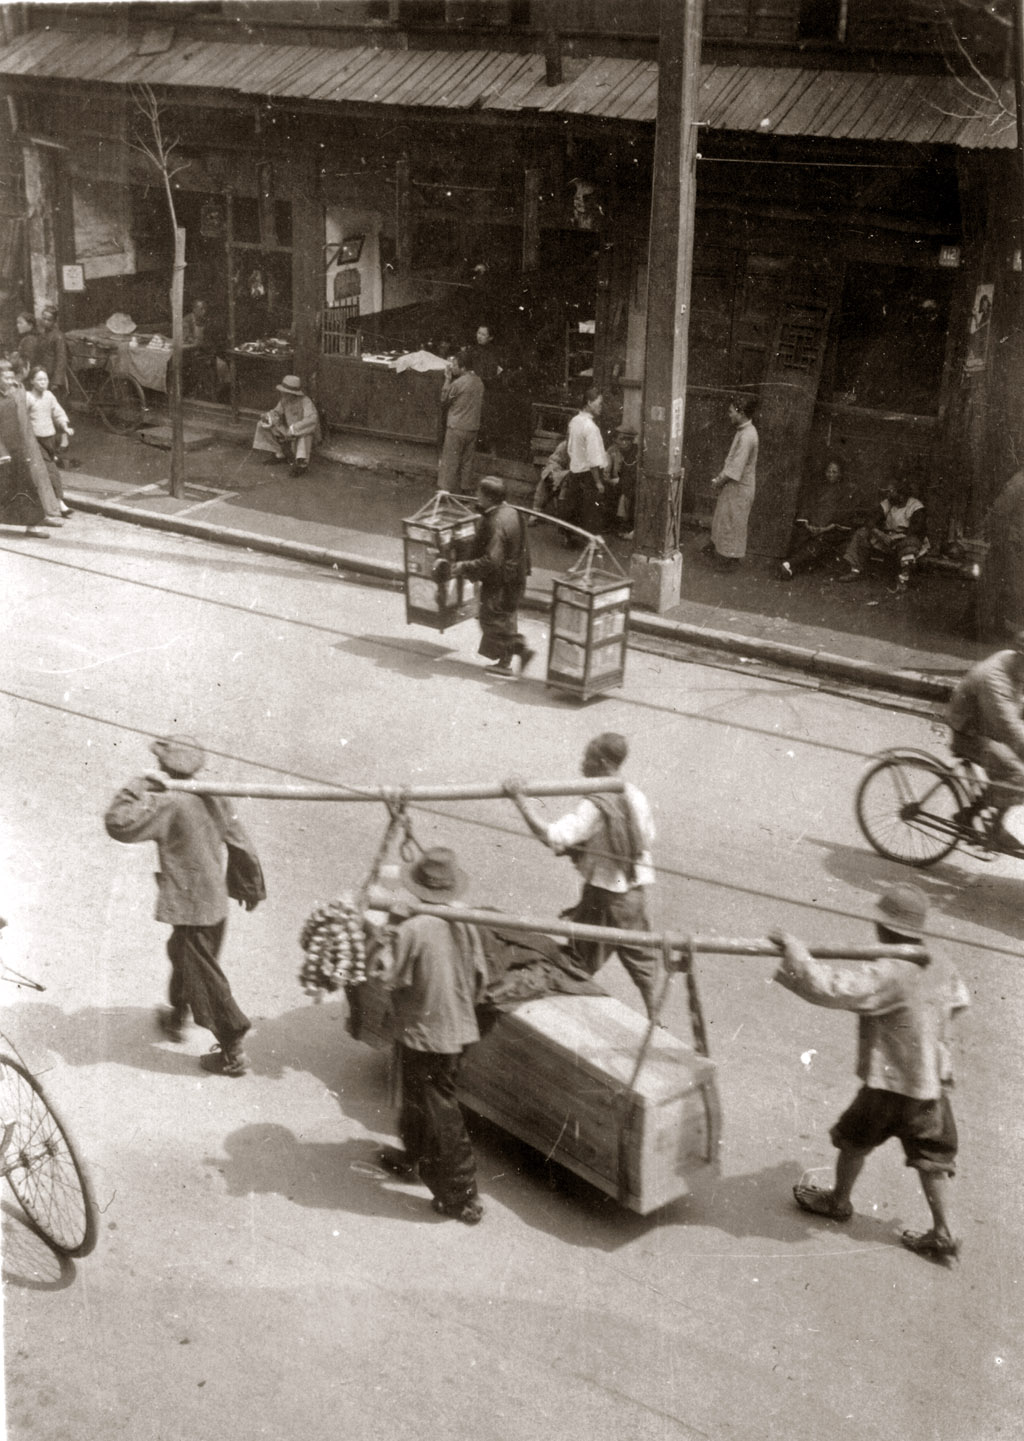 Ward Road, Shanghai, June 22, 1932. I found this photo in a junk shop in England about 20 years ago. Do I win a prize for submitting the first Chinese picture?

[Very nice. You win ... a big round of applause! Clapclapclapclap - Dave]